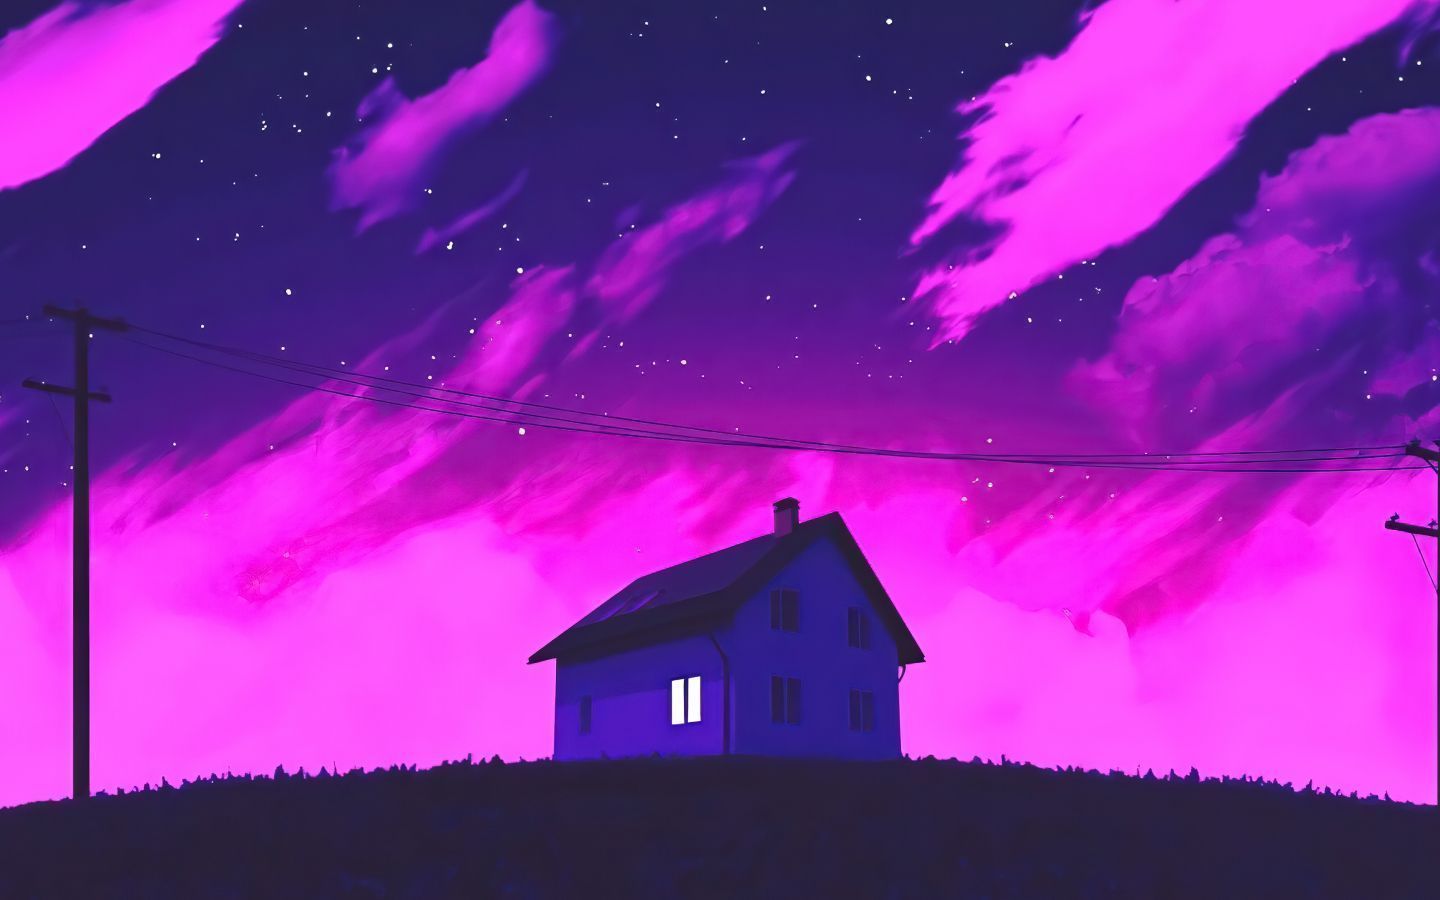 A house in the sky with purple clouds - 1440x900